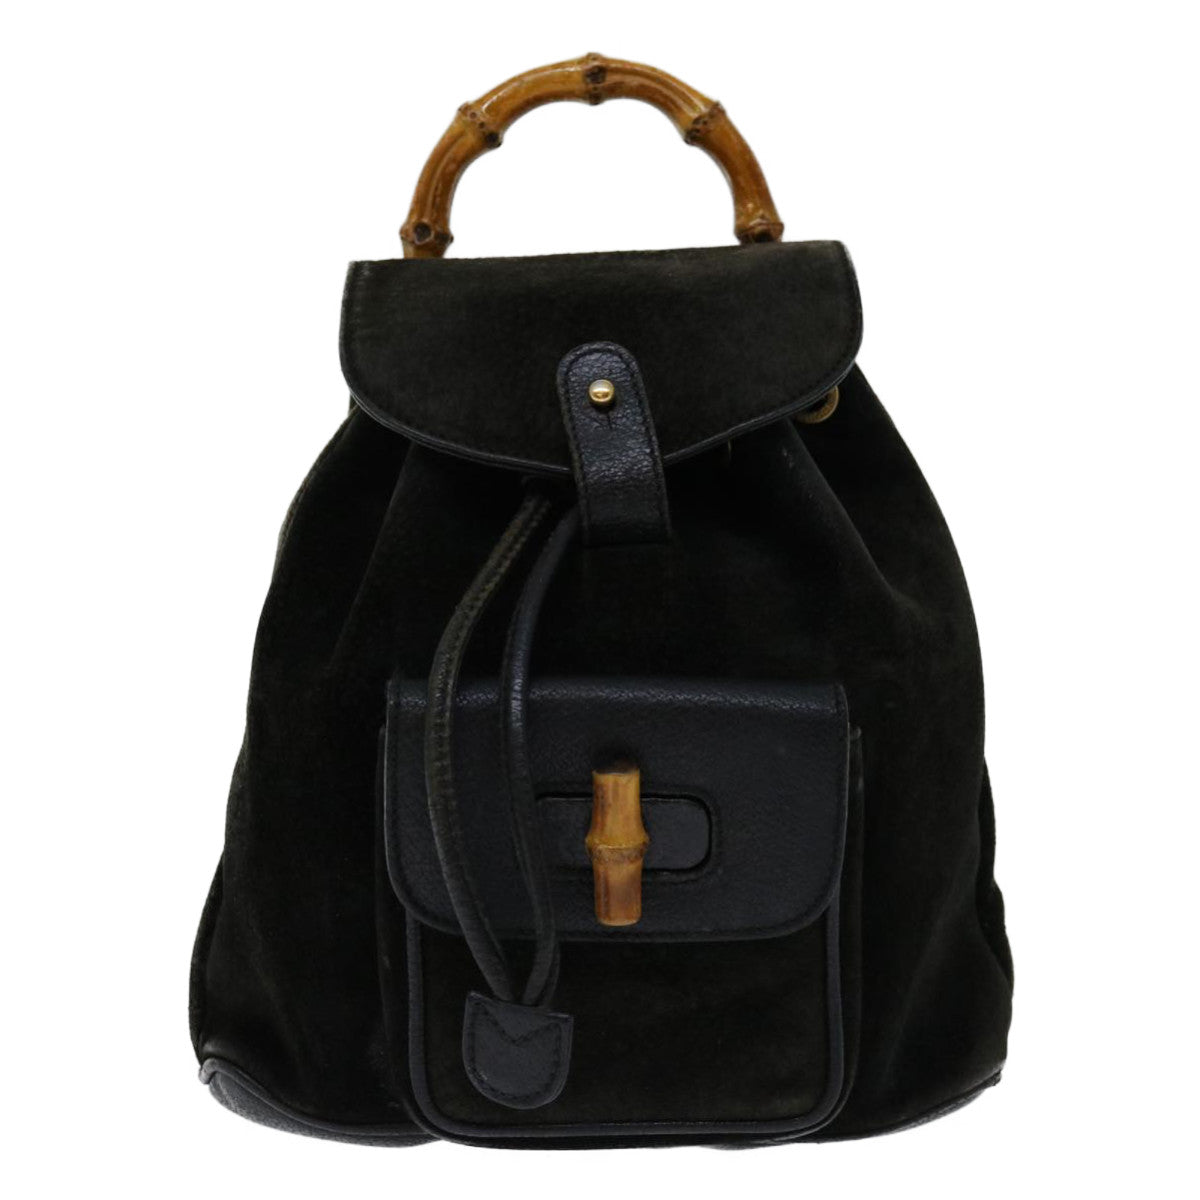 GUCCI Bamboo Backpack Suede Black 003 1956 0030 Auth ep3893 - 0